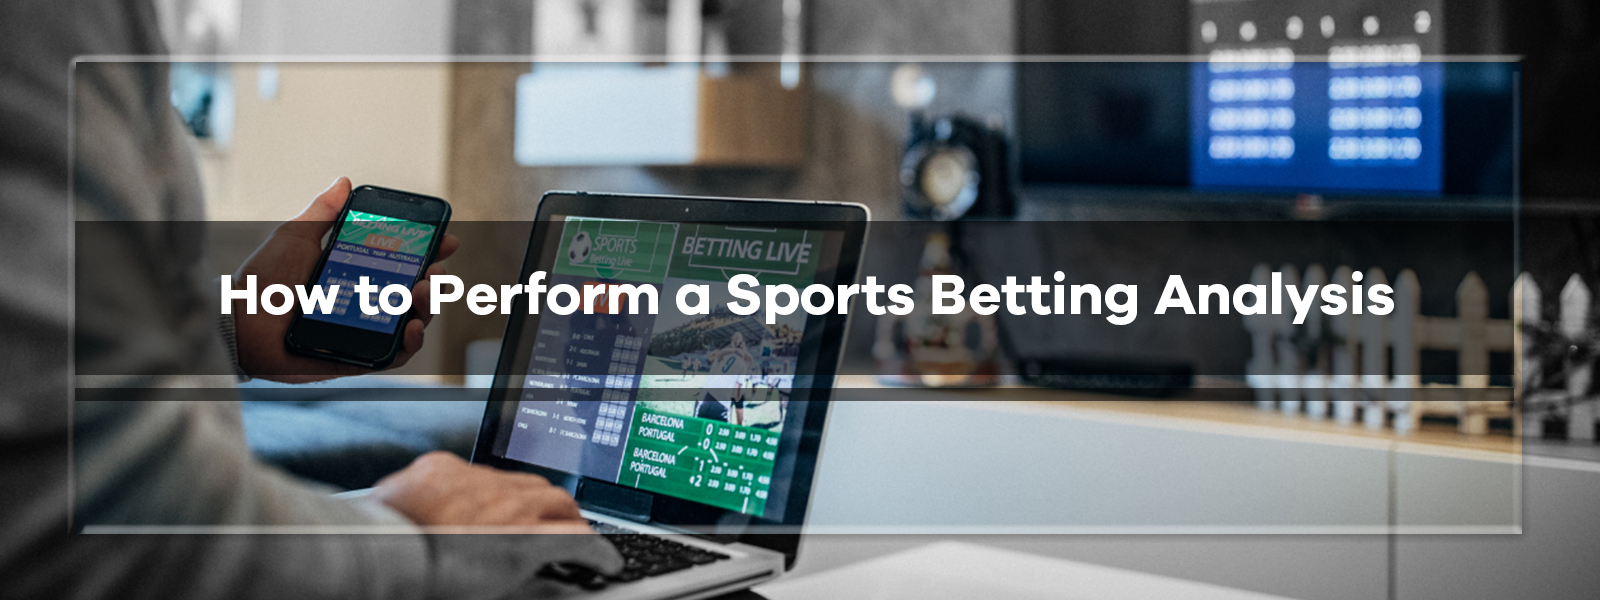 How To Perform A Sports Betting Analysis